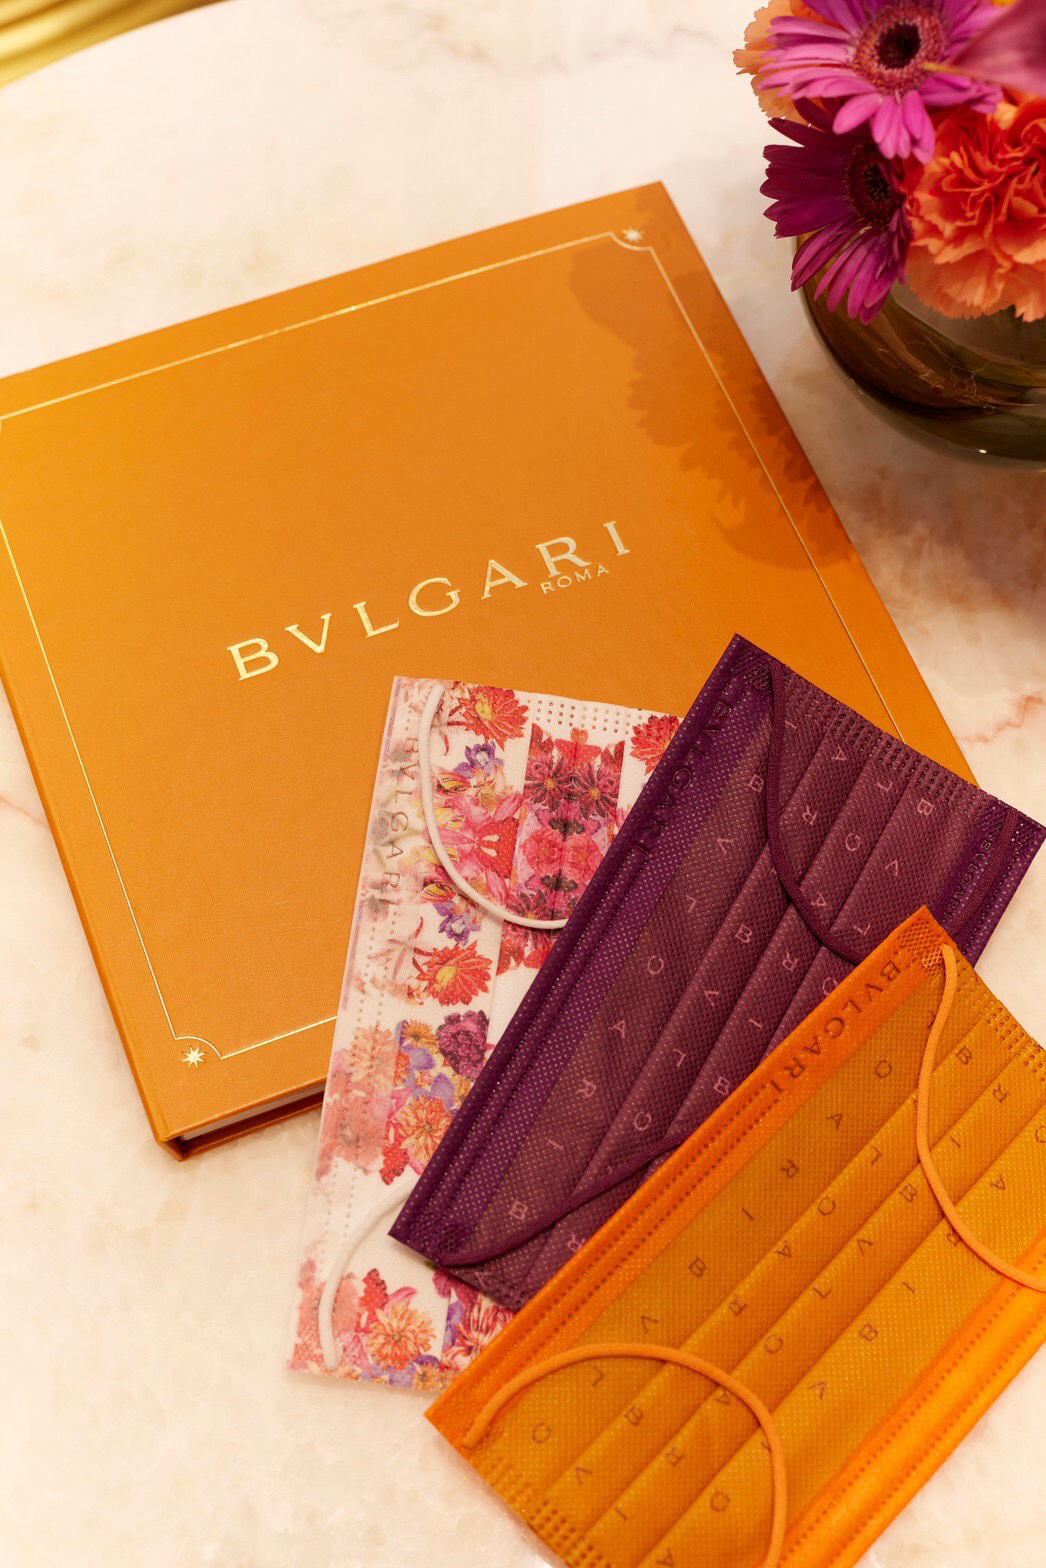 CSD’s disposable medical products has been recognized as the world-class quality, attract Bulgari to